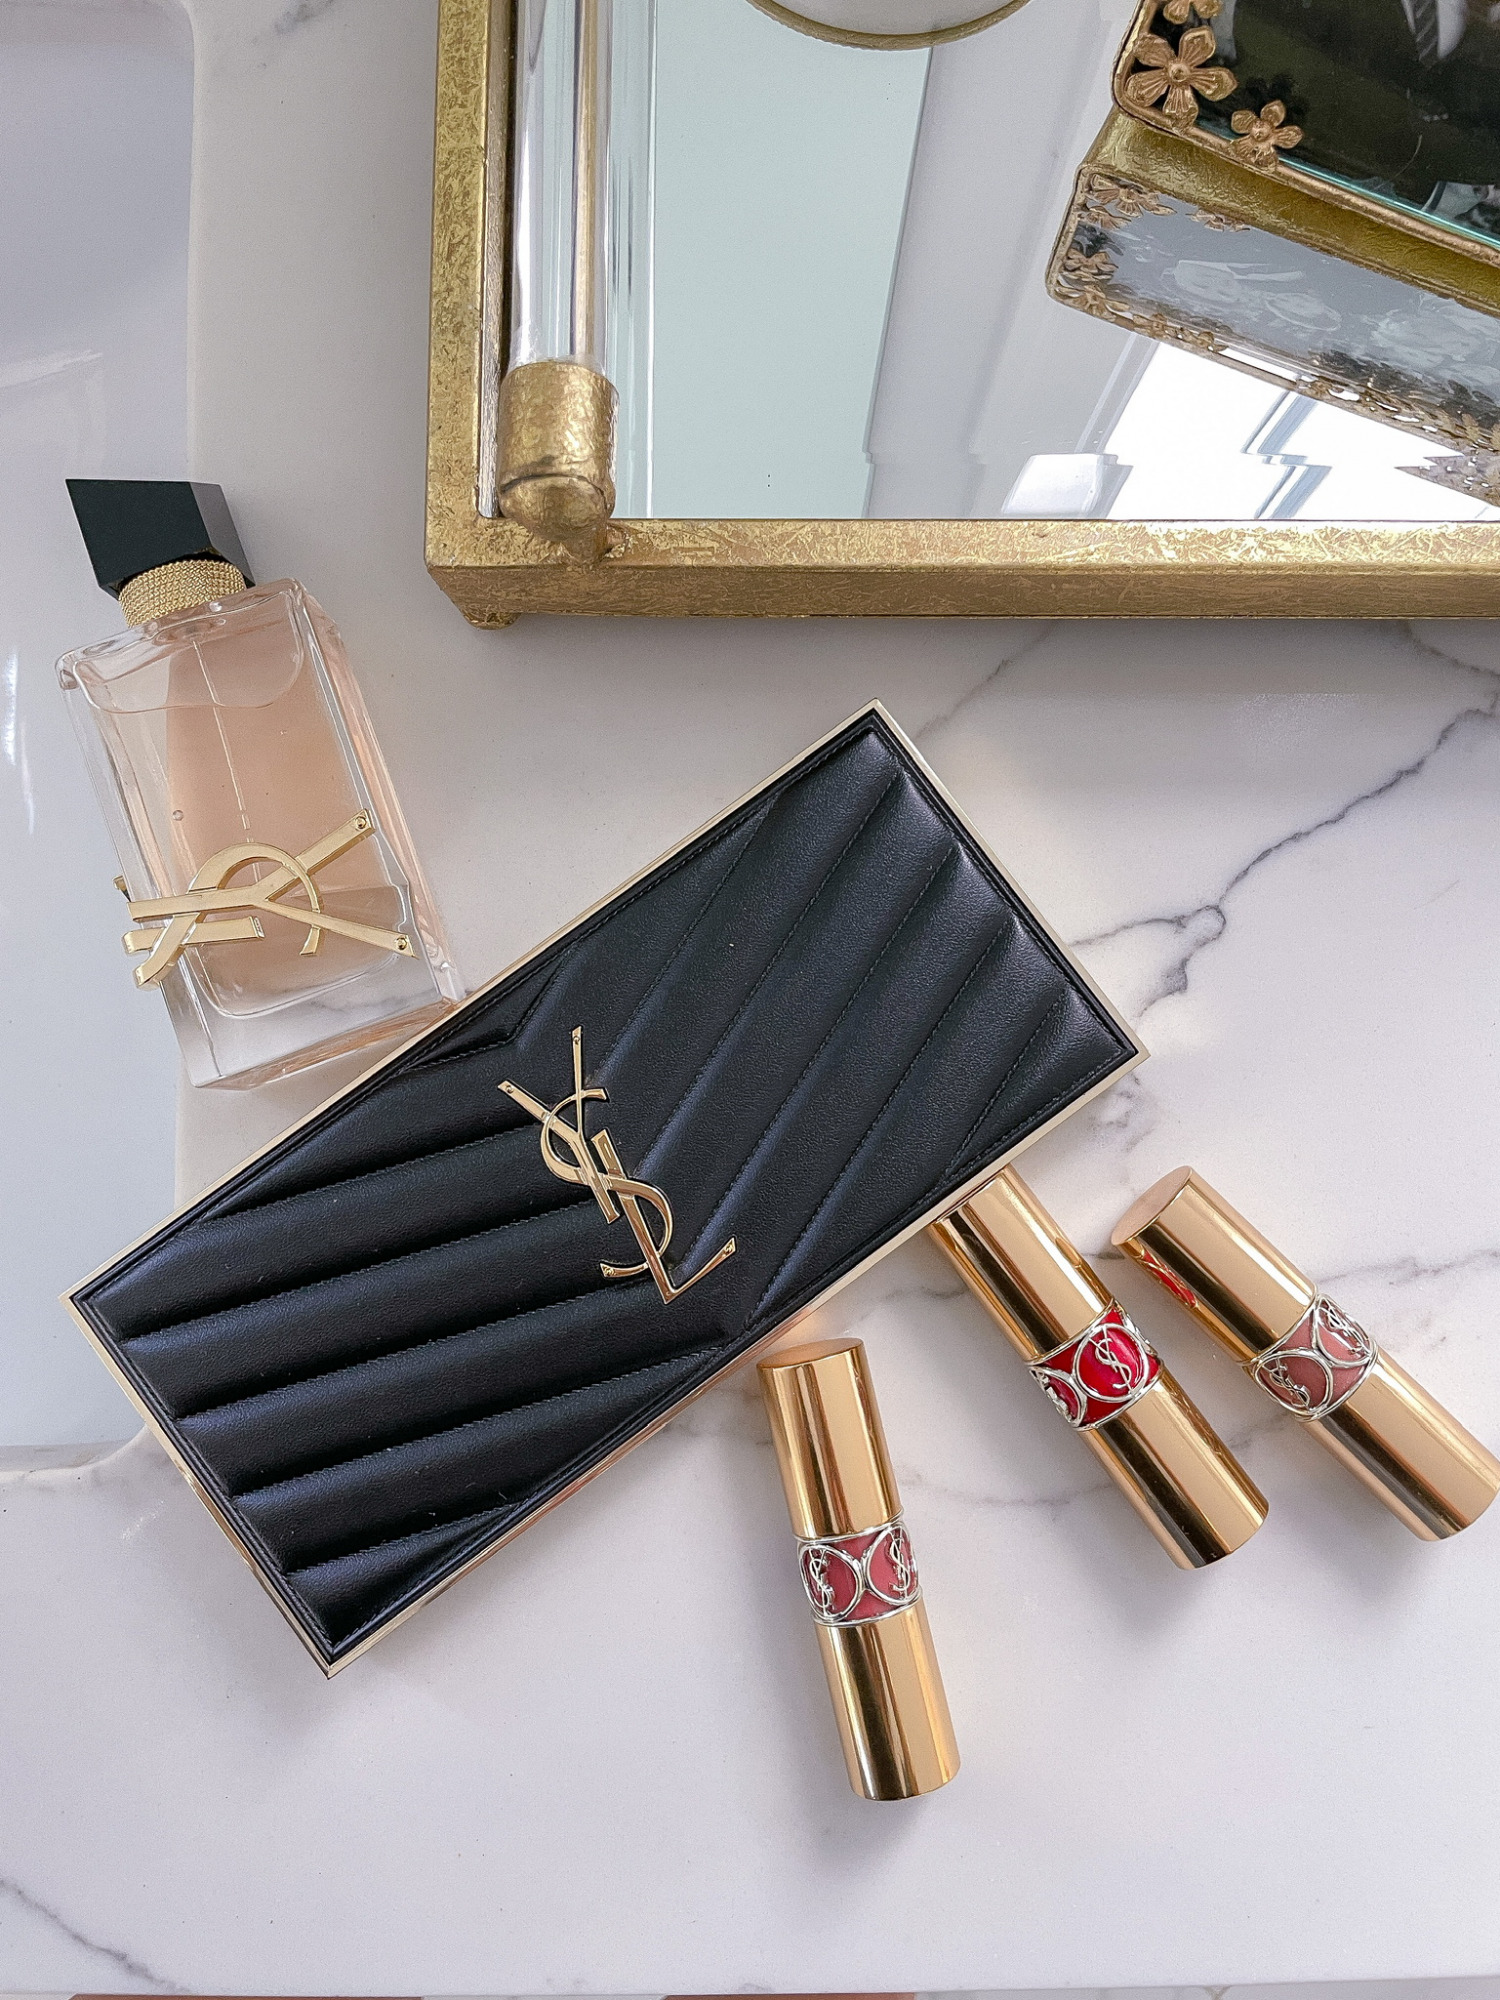 YSL-beaute-review-lipstick-rouge-volupte-shine-summer-lipstick-ltk-day-sale | June Instagram Recap by popular US fashion blog, The Sweetest Thing: image of YSL lipstick. 